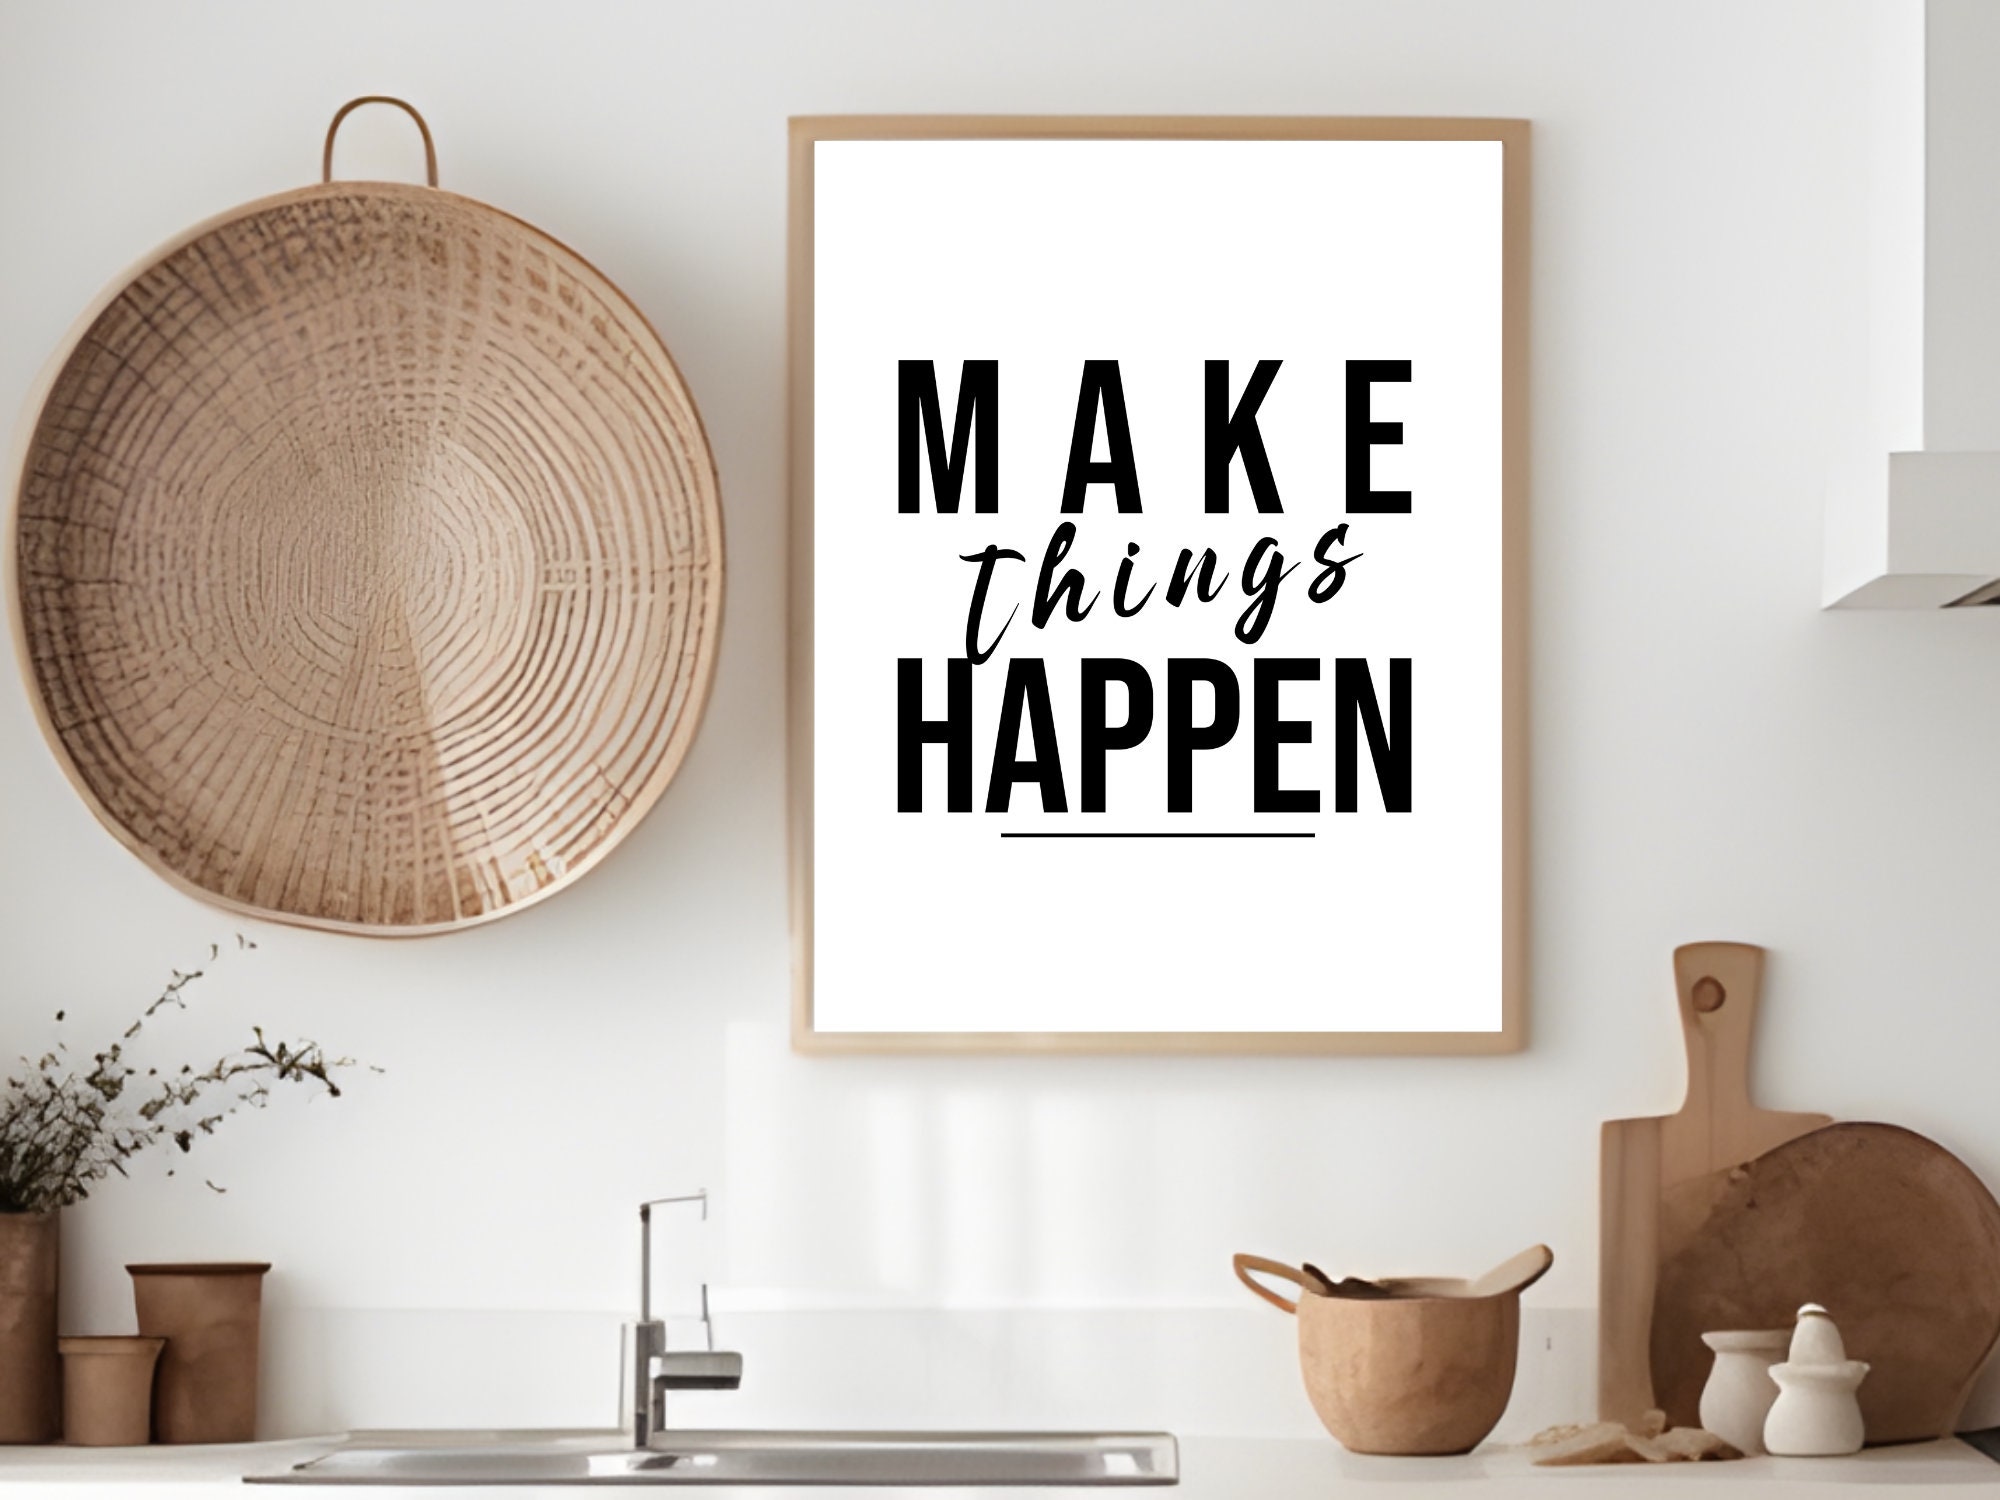 Make Things Happen Motivational Quote - Wall Art Decal - 18 x 21